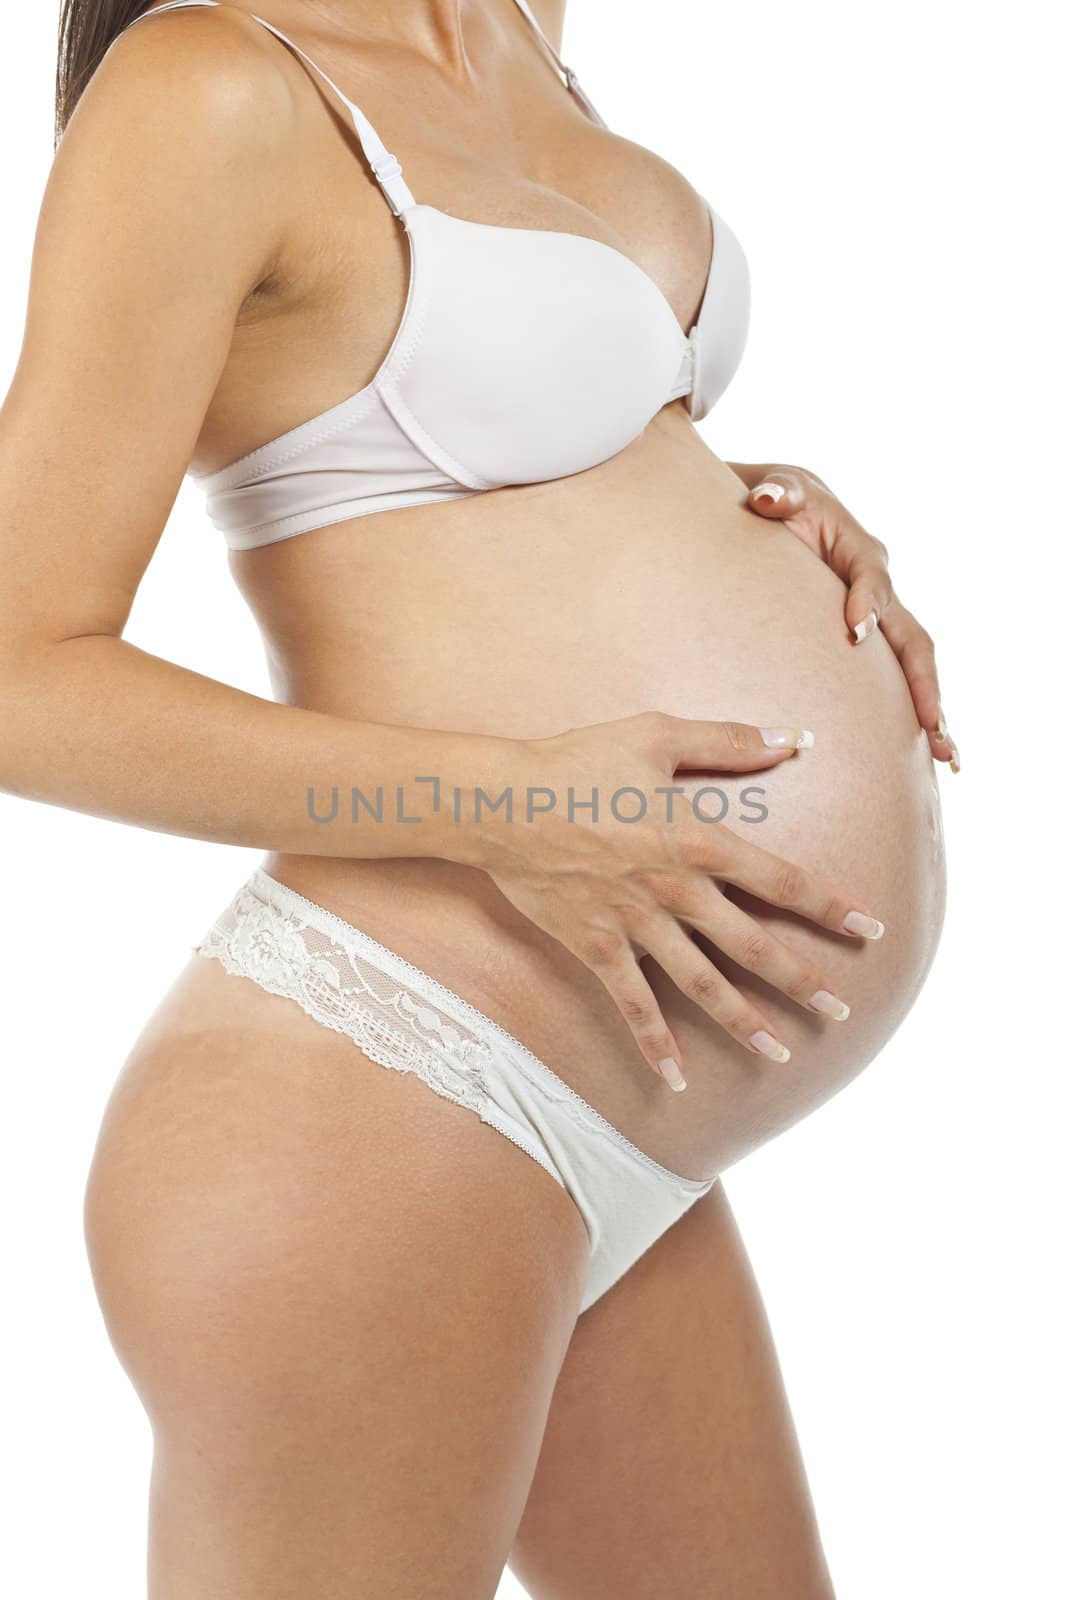 Future mother - Pregnant woman holding tummy